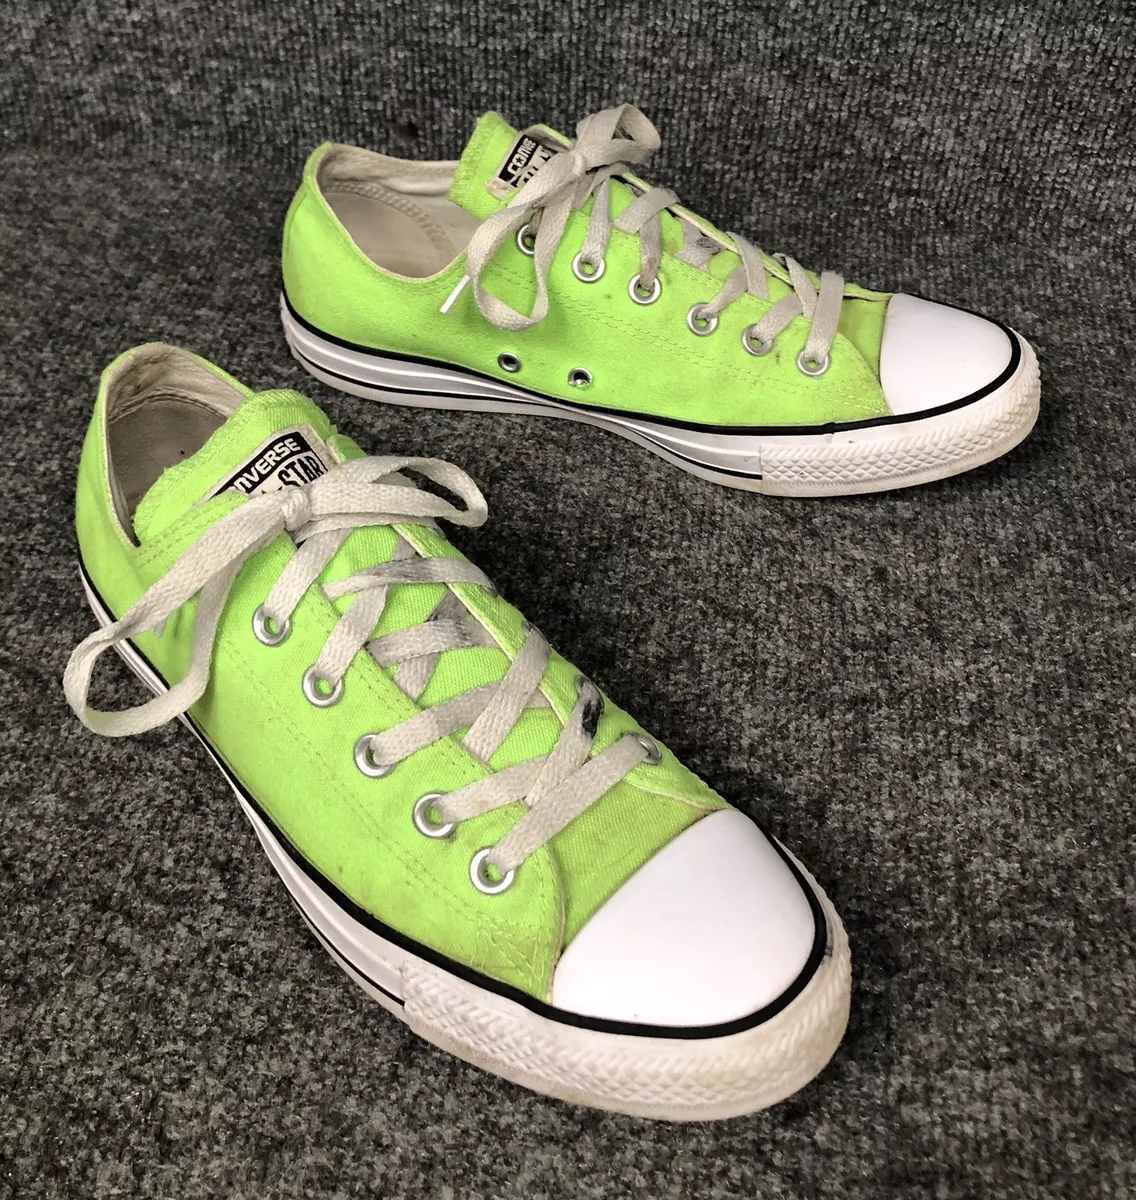 Temmelig krabbe solidaritet Converse All Star Low Tops Lime Green Sneakers Shoes Mens 7 Womens 9 In EUC  | eBay